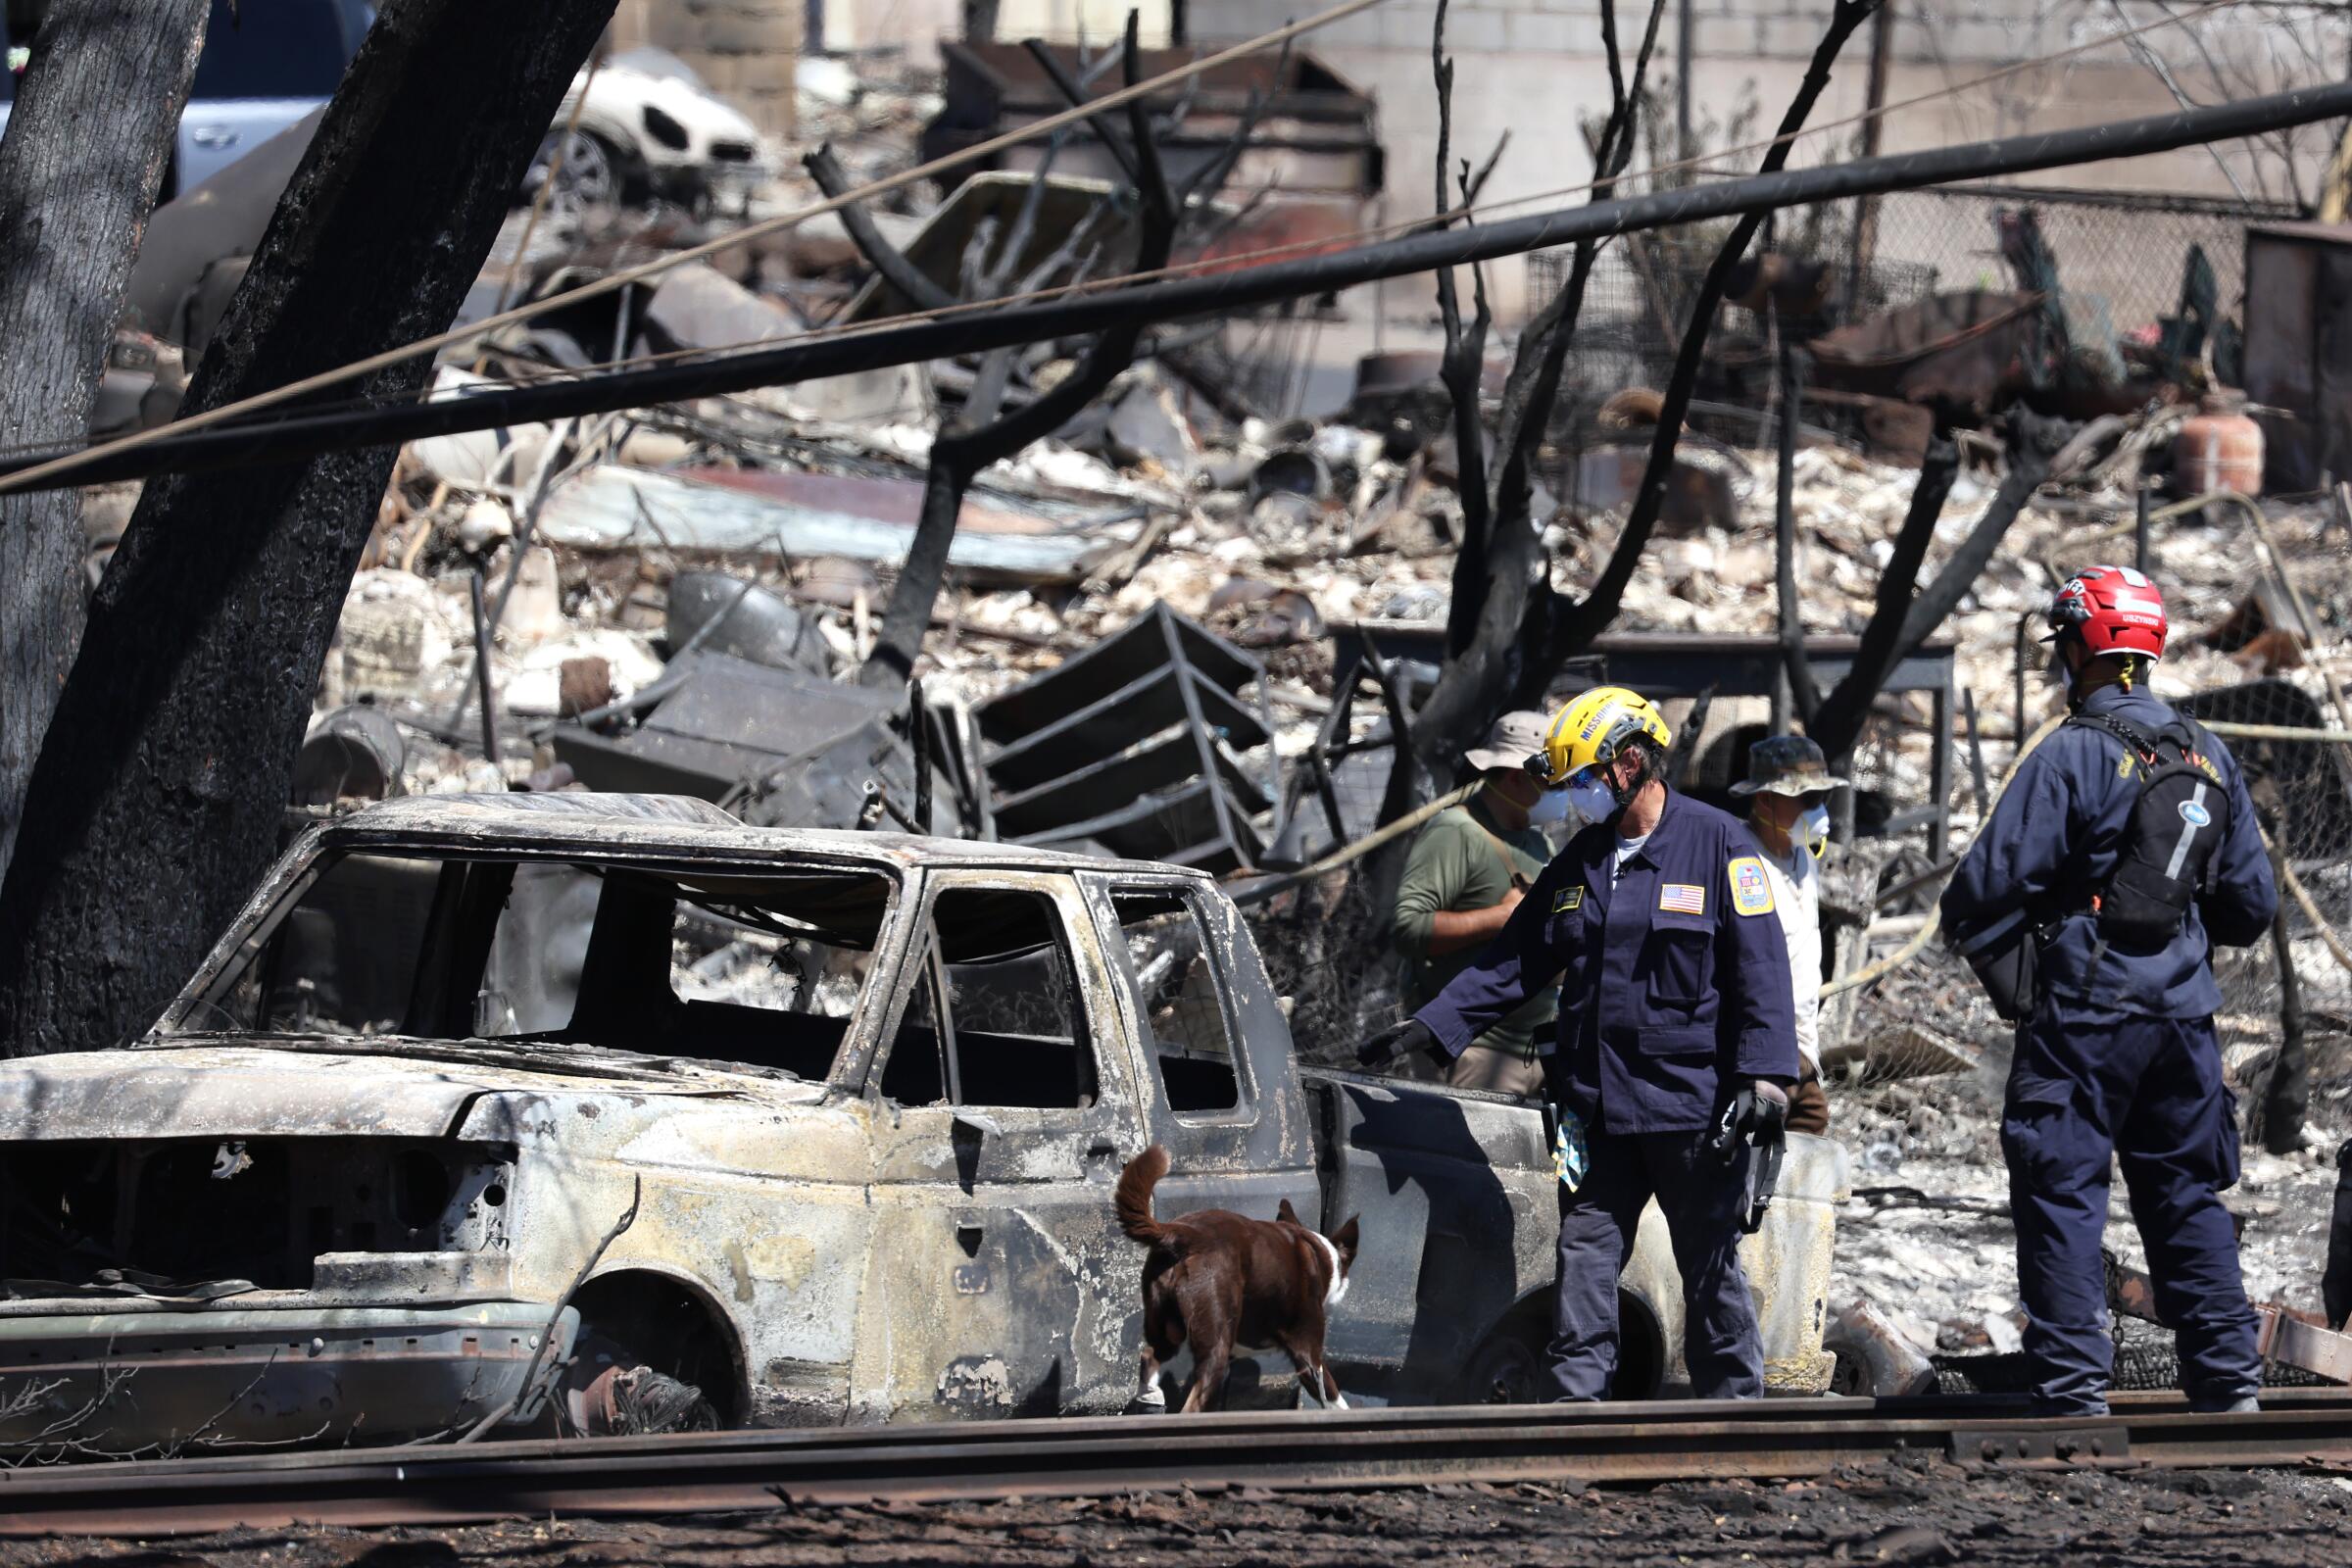 Search and rescue crews look through the burnt wreckage of buildings and vehicles in Lahaina